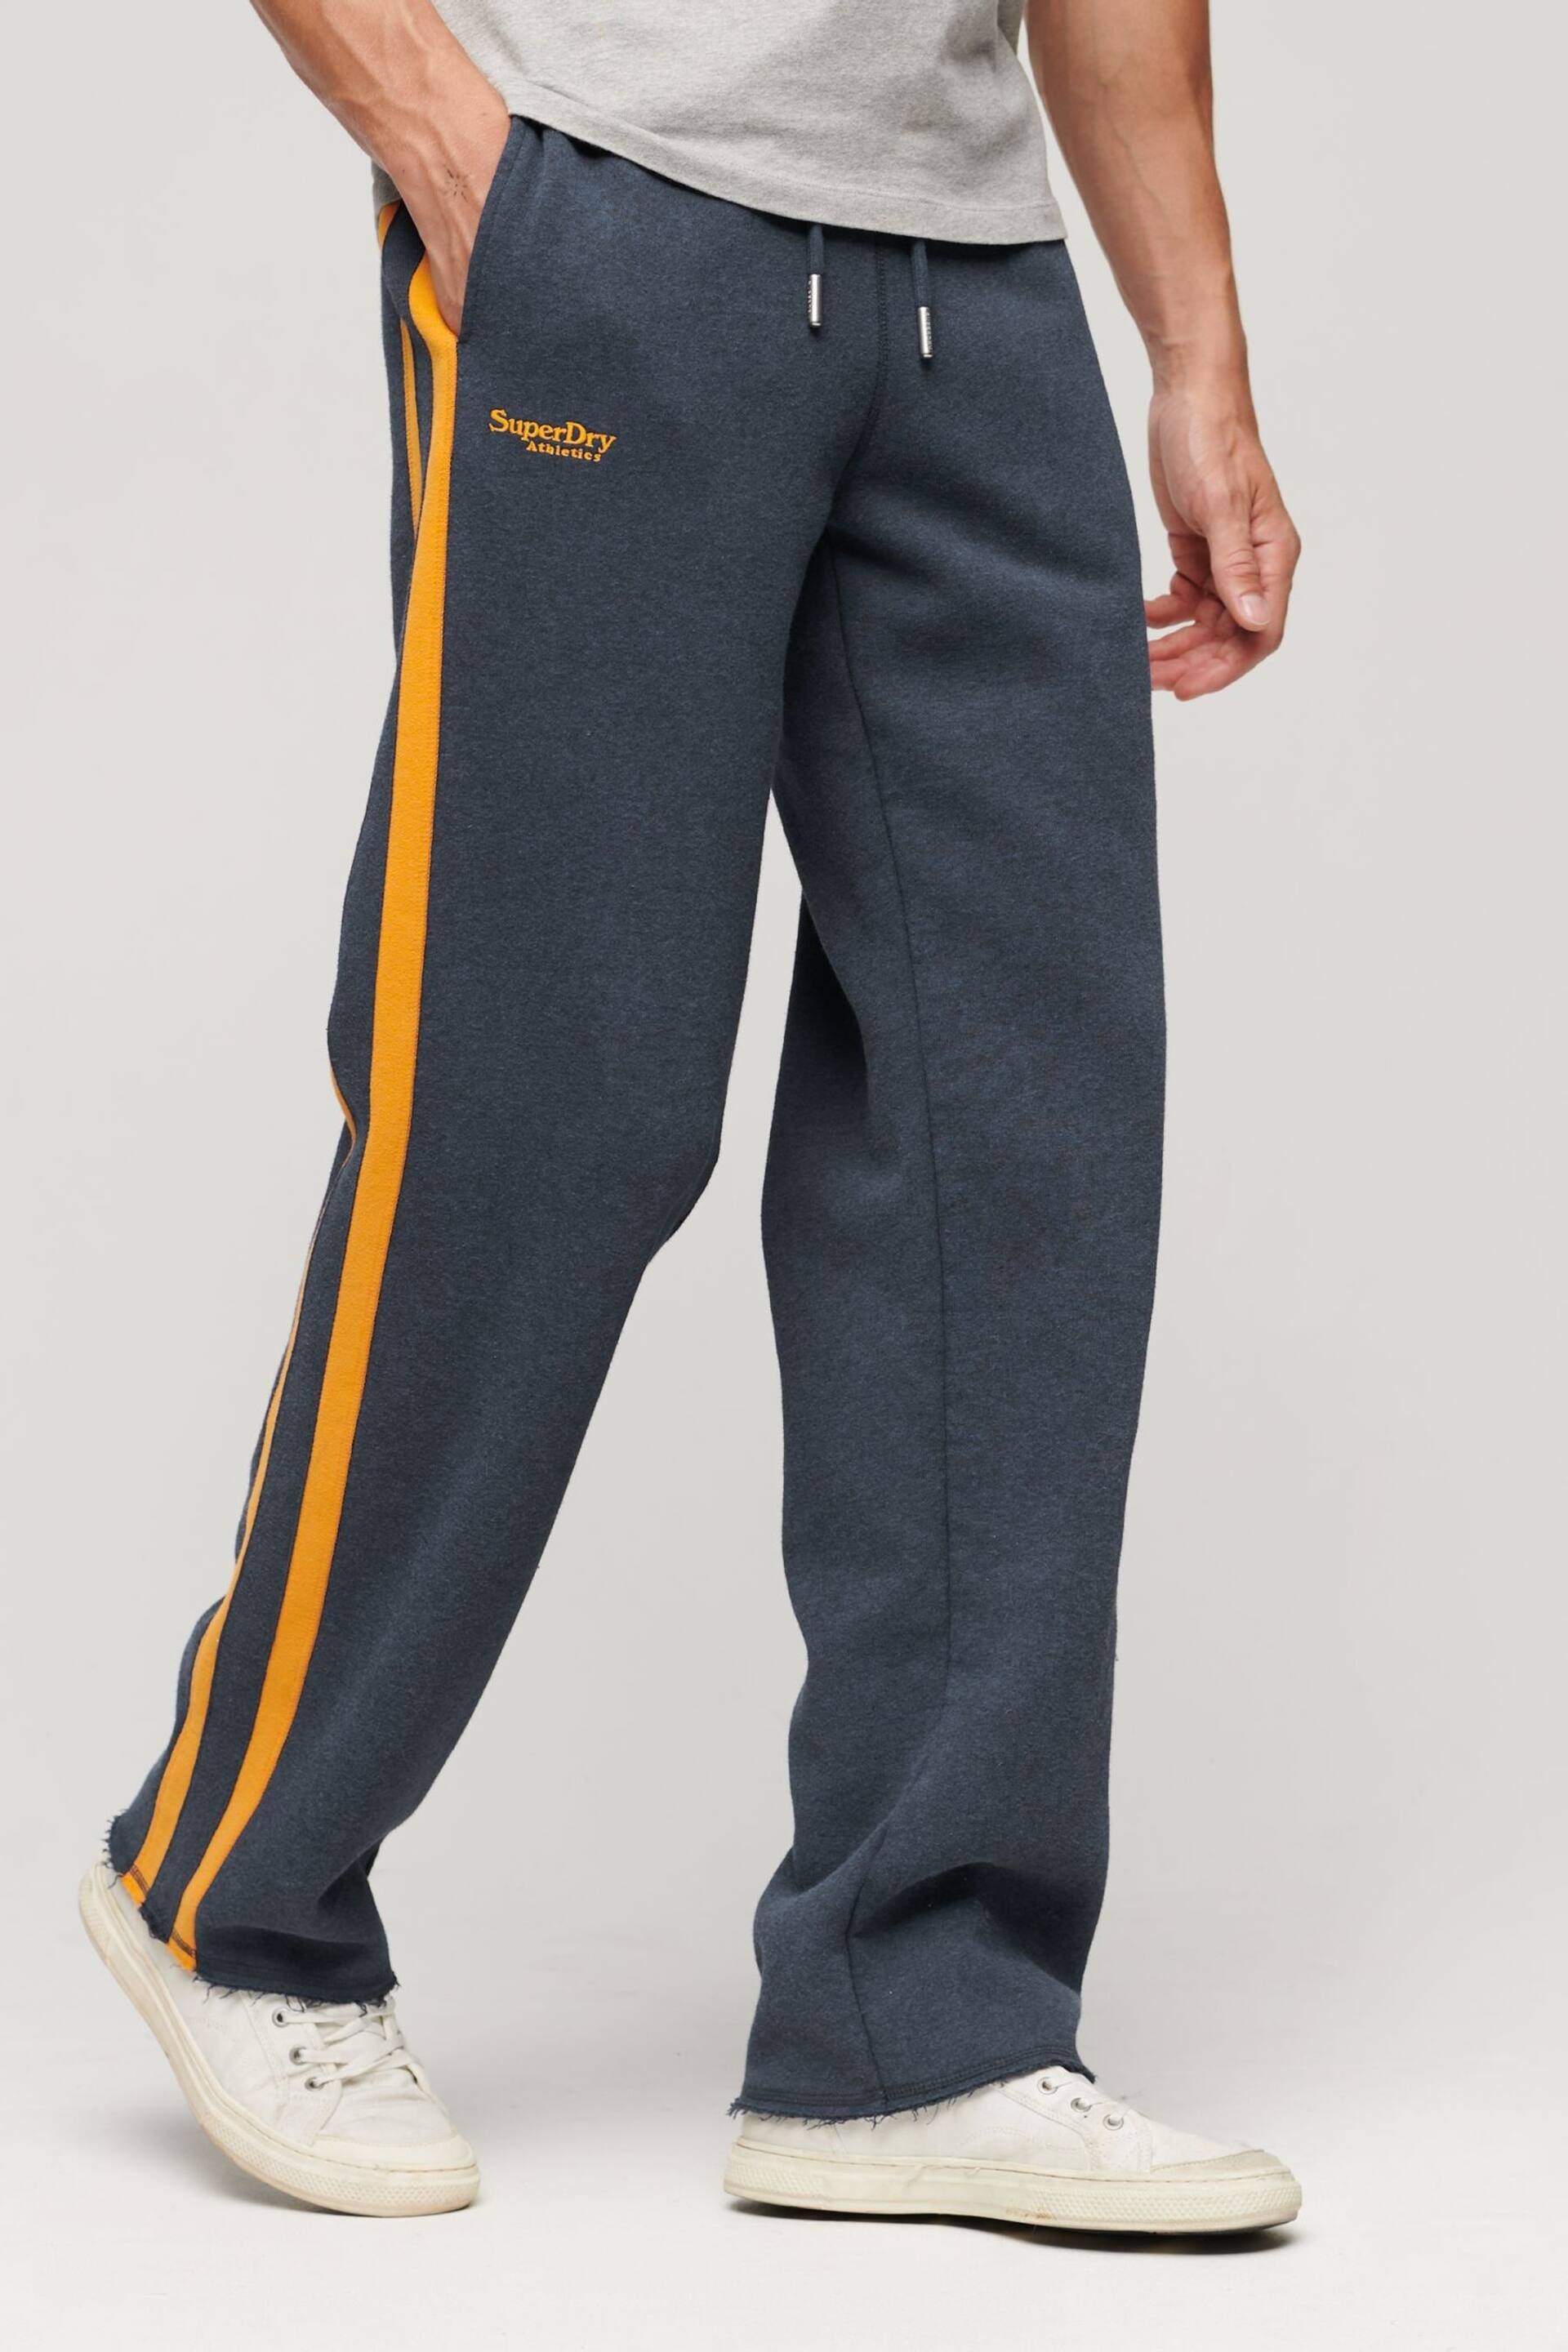 Superdry Blue Essential Straight Joggers - Image 1 of 7